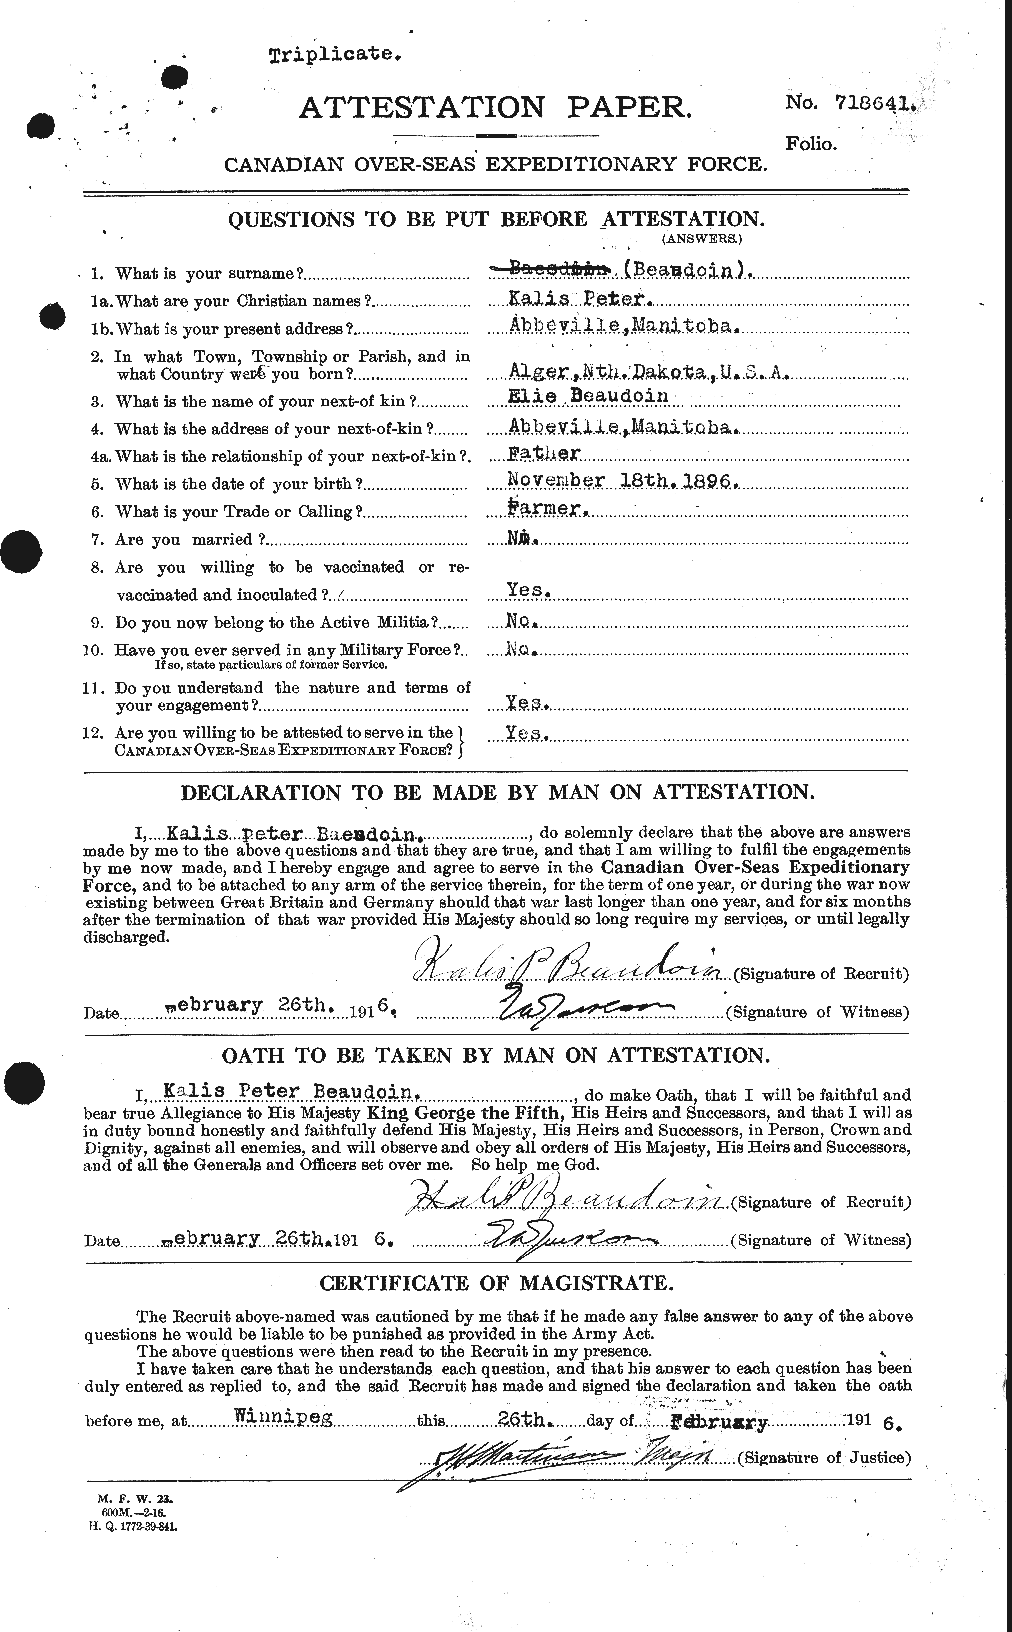 Personnel Records of the First World War - CEF 231268a